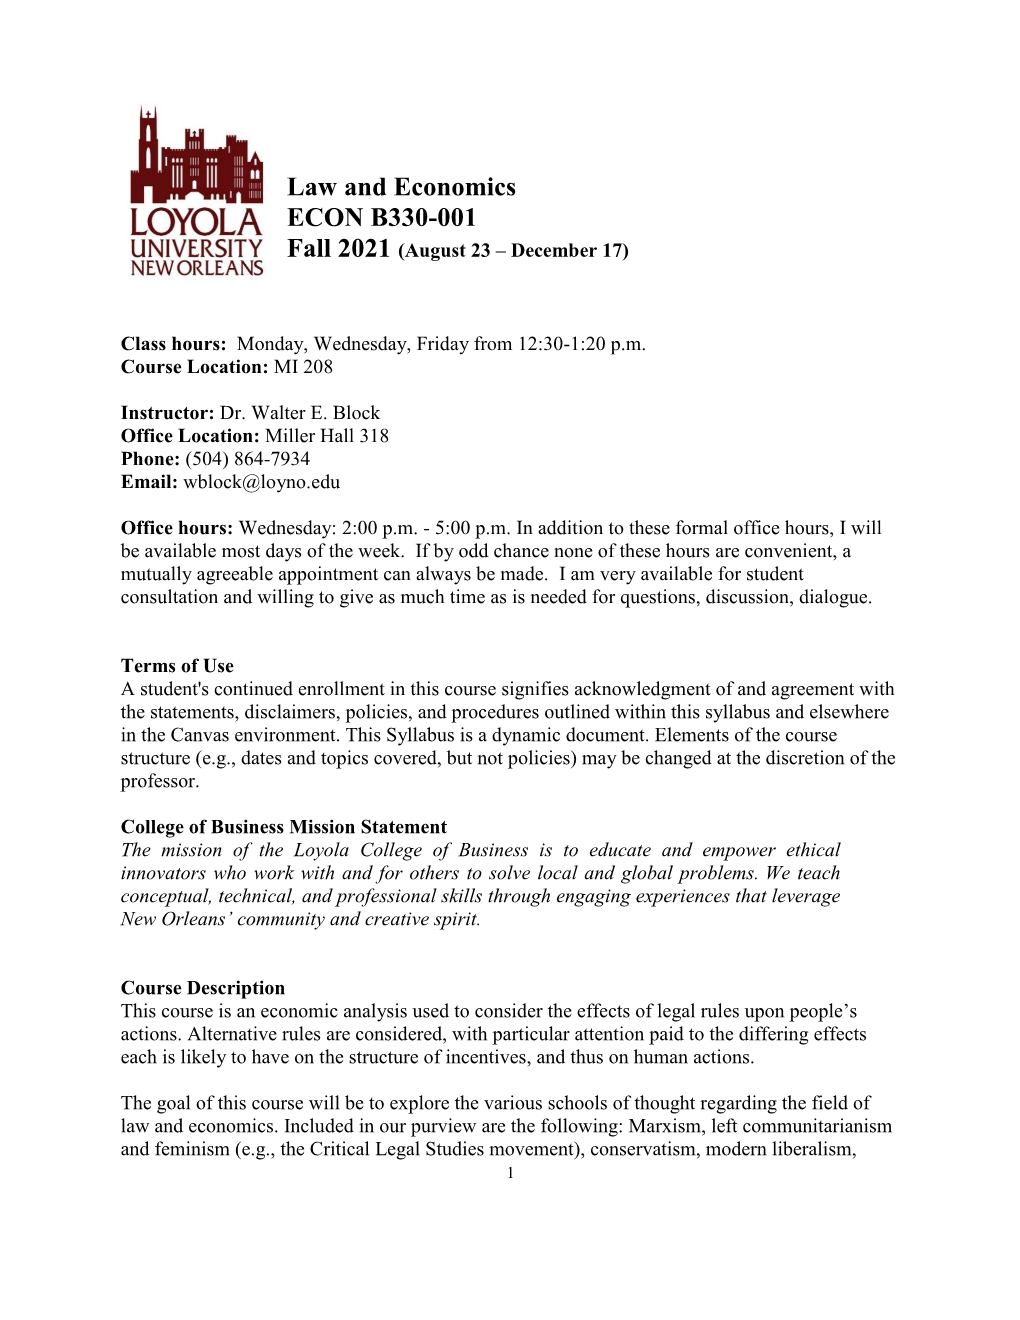 Law and Economics ECON B330-001 Fall 2021 (August 23 – December 17)